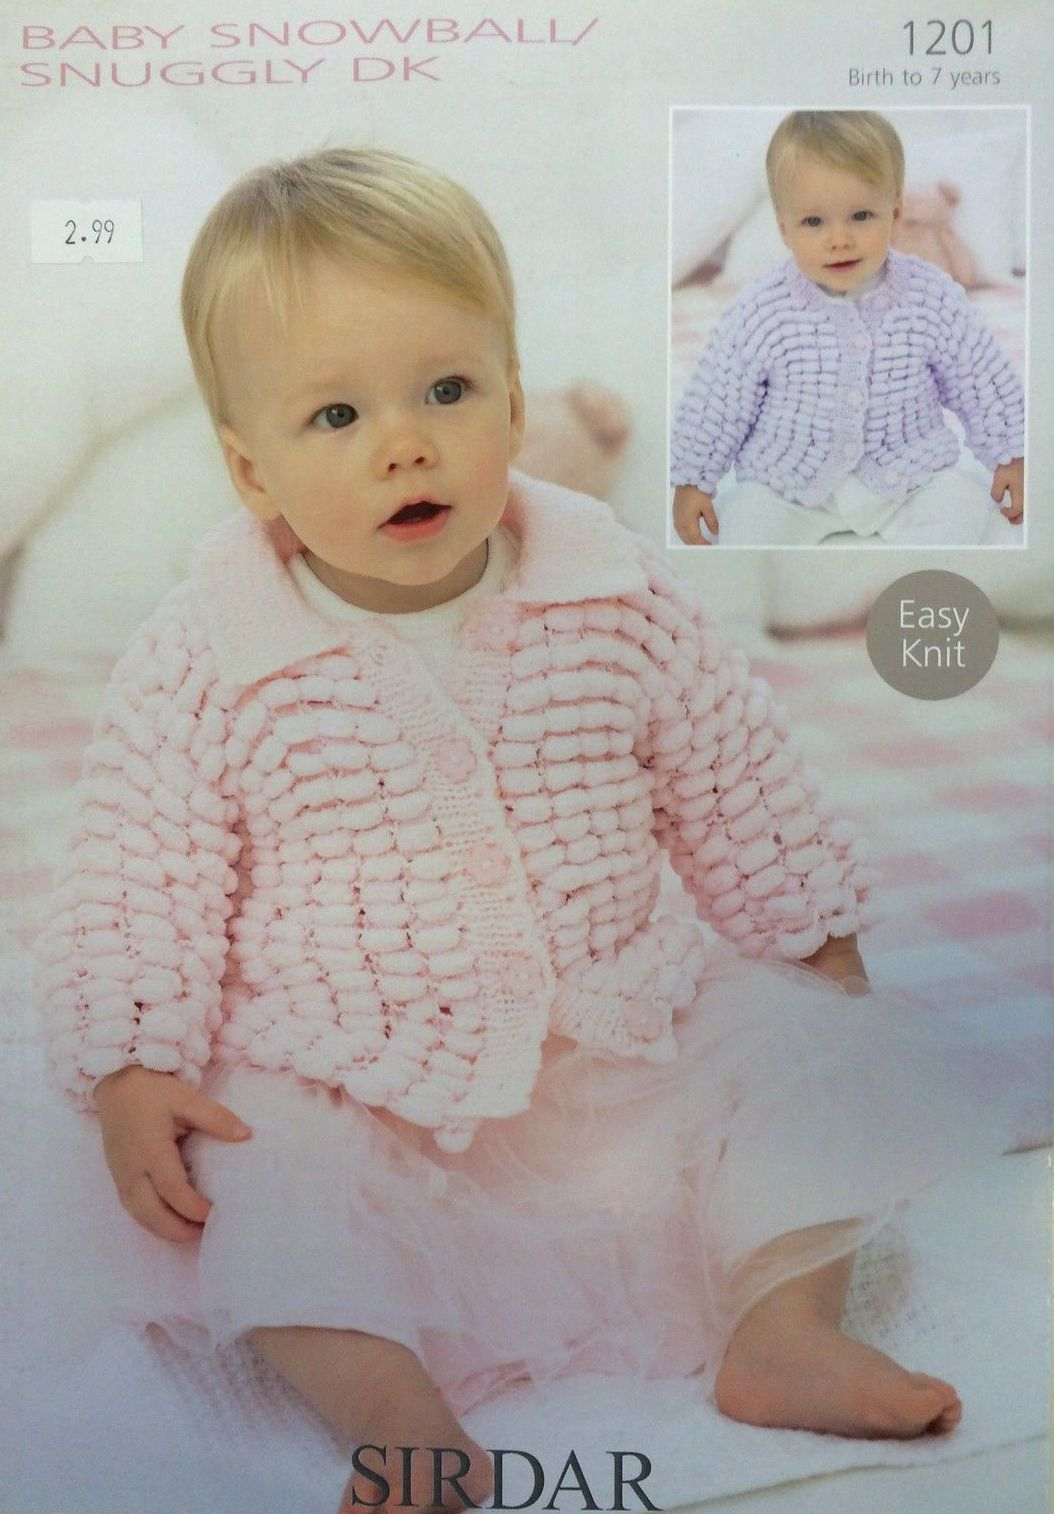 Sirdar Baby Knitting Patterns 1201 Sirdar Snuggly Ba Snowball Snuggly Dk Cardigan Knitting Pattern To Fit 0 To 7 Years